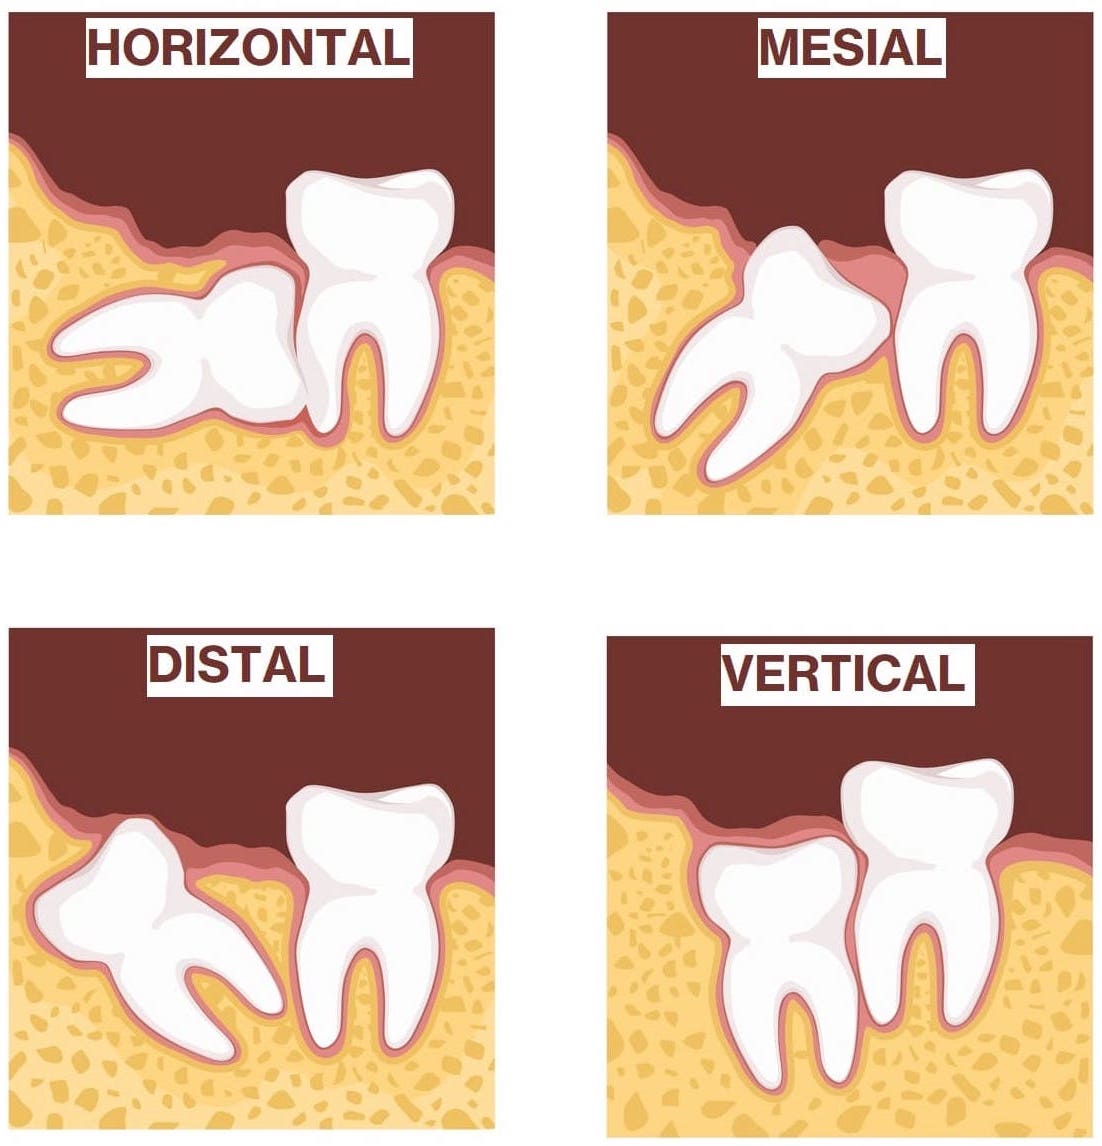 Types of Wisdom Tooth Impaction That Require Wisdom Teeth Removal